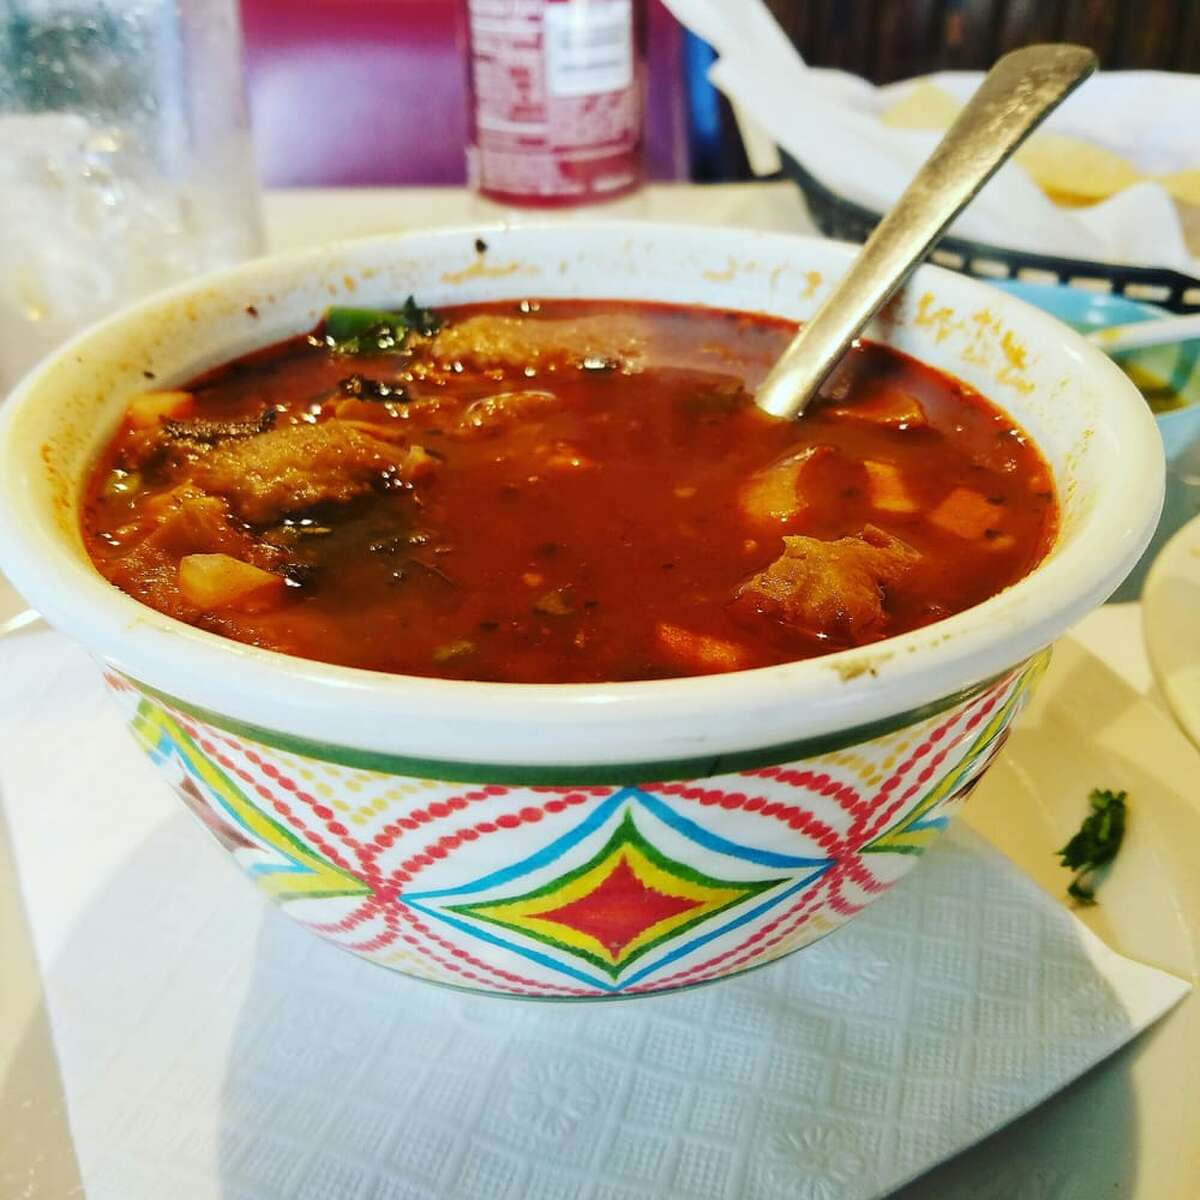 1. La Guadalupana Bakery & Café Montrose Address: 2109 Dunlavy St Sample review: "I've tried menudo all over Texas and California.  Hands down best menudo ever tasted." Photo: Tim D./Yelp